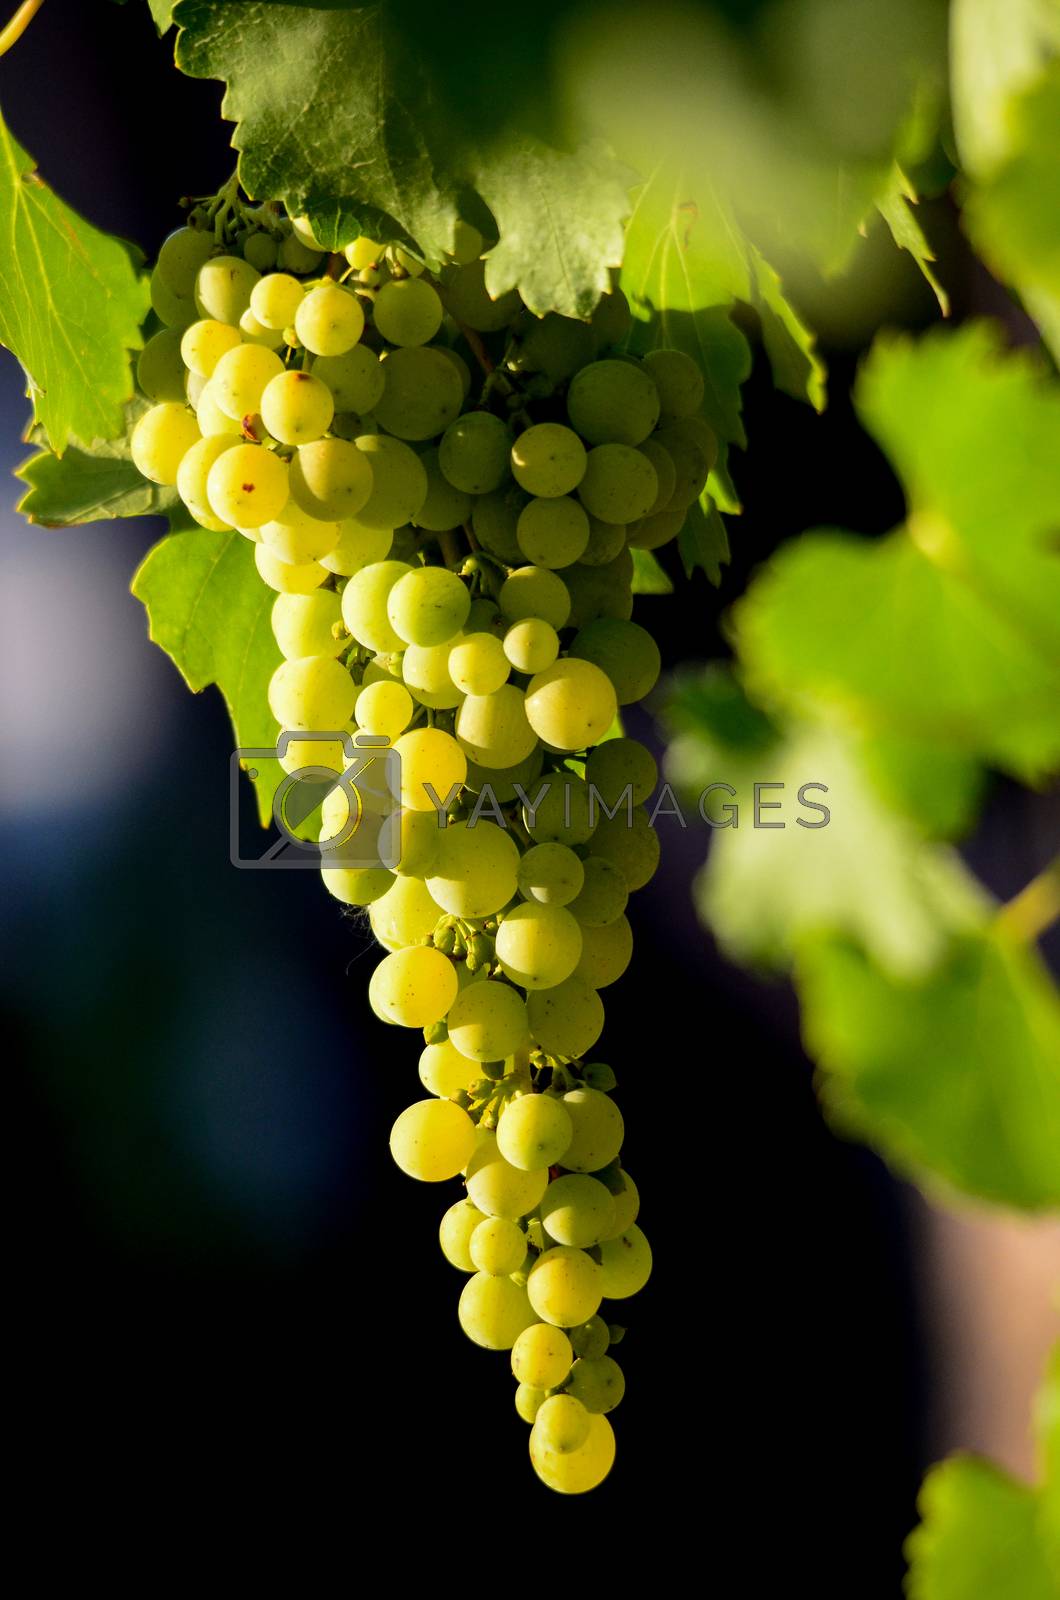 Royalty free image of  Grapes in the vineyard , winery, wine, morning,  by nehru